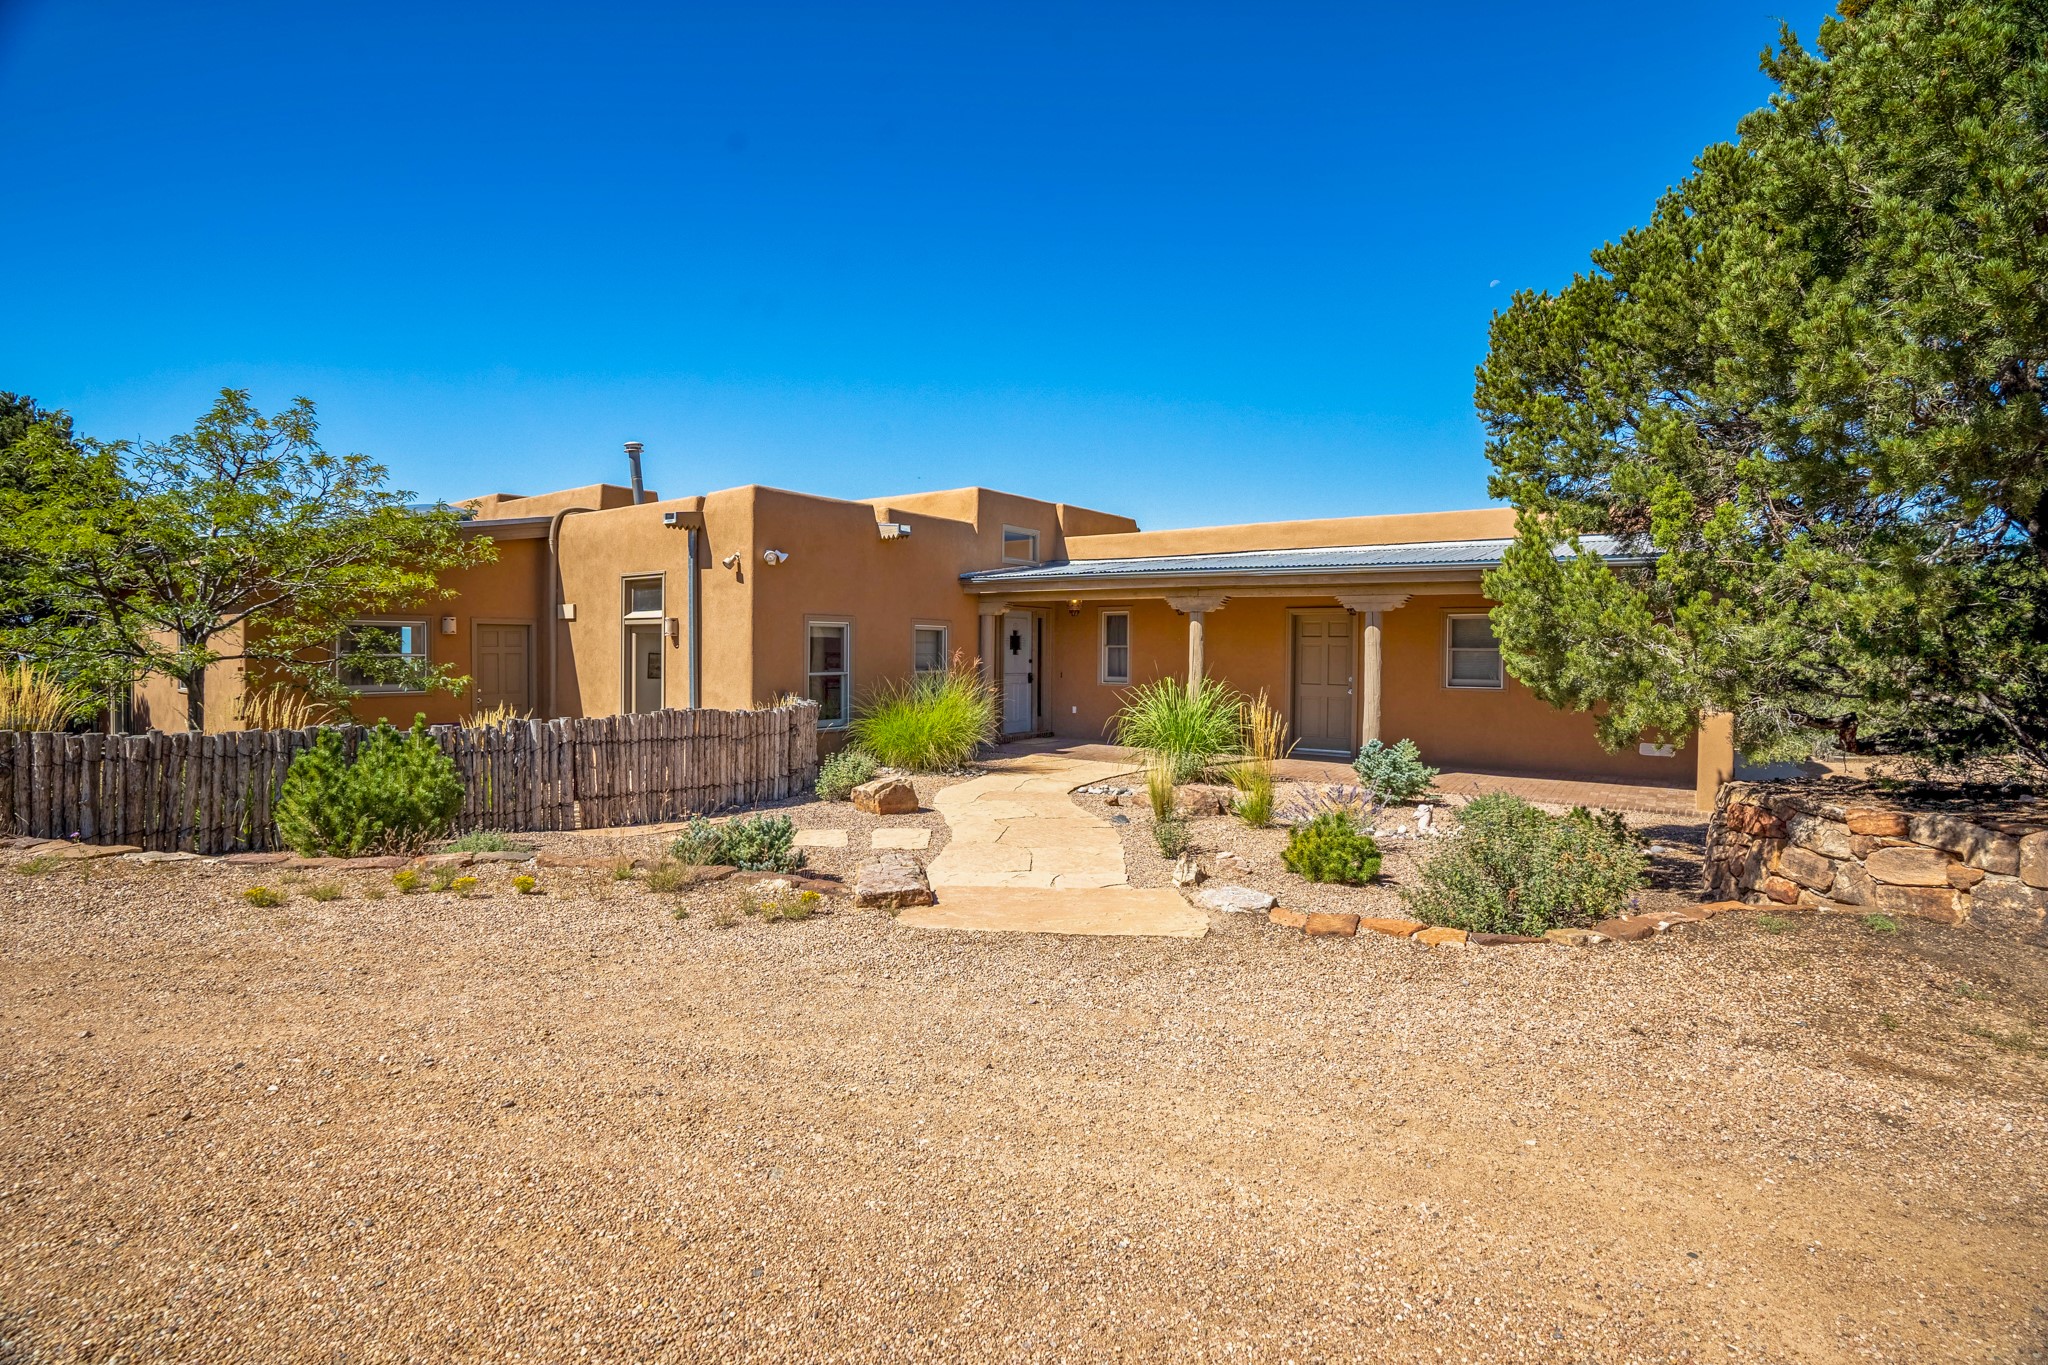 62 Old Agua Fria Rd W, Santa Fe, New Mexico 87508, 3 Bedrooms Bedrooms, ,3 BathroomsBathrooms,Residential,For Sale,62 Old Agua Fria Rd W,202233170